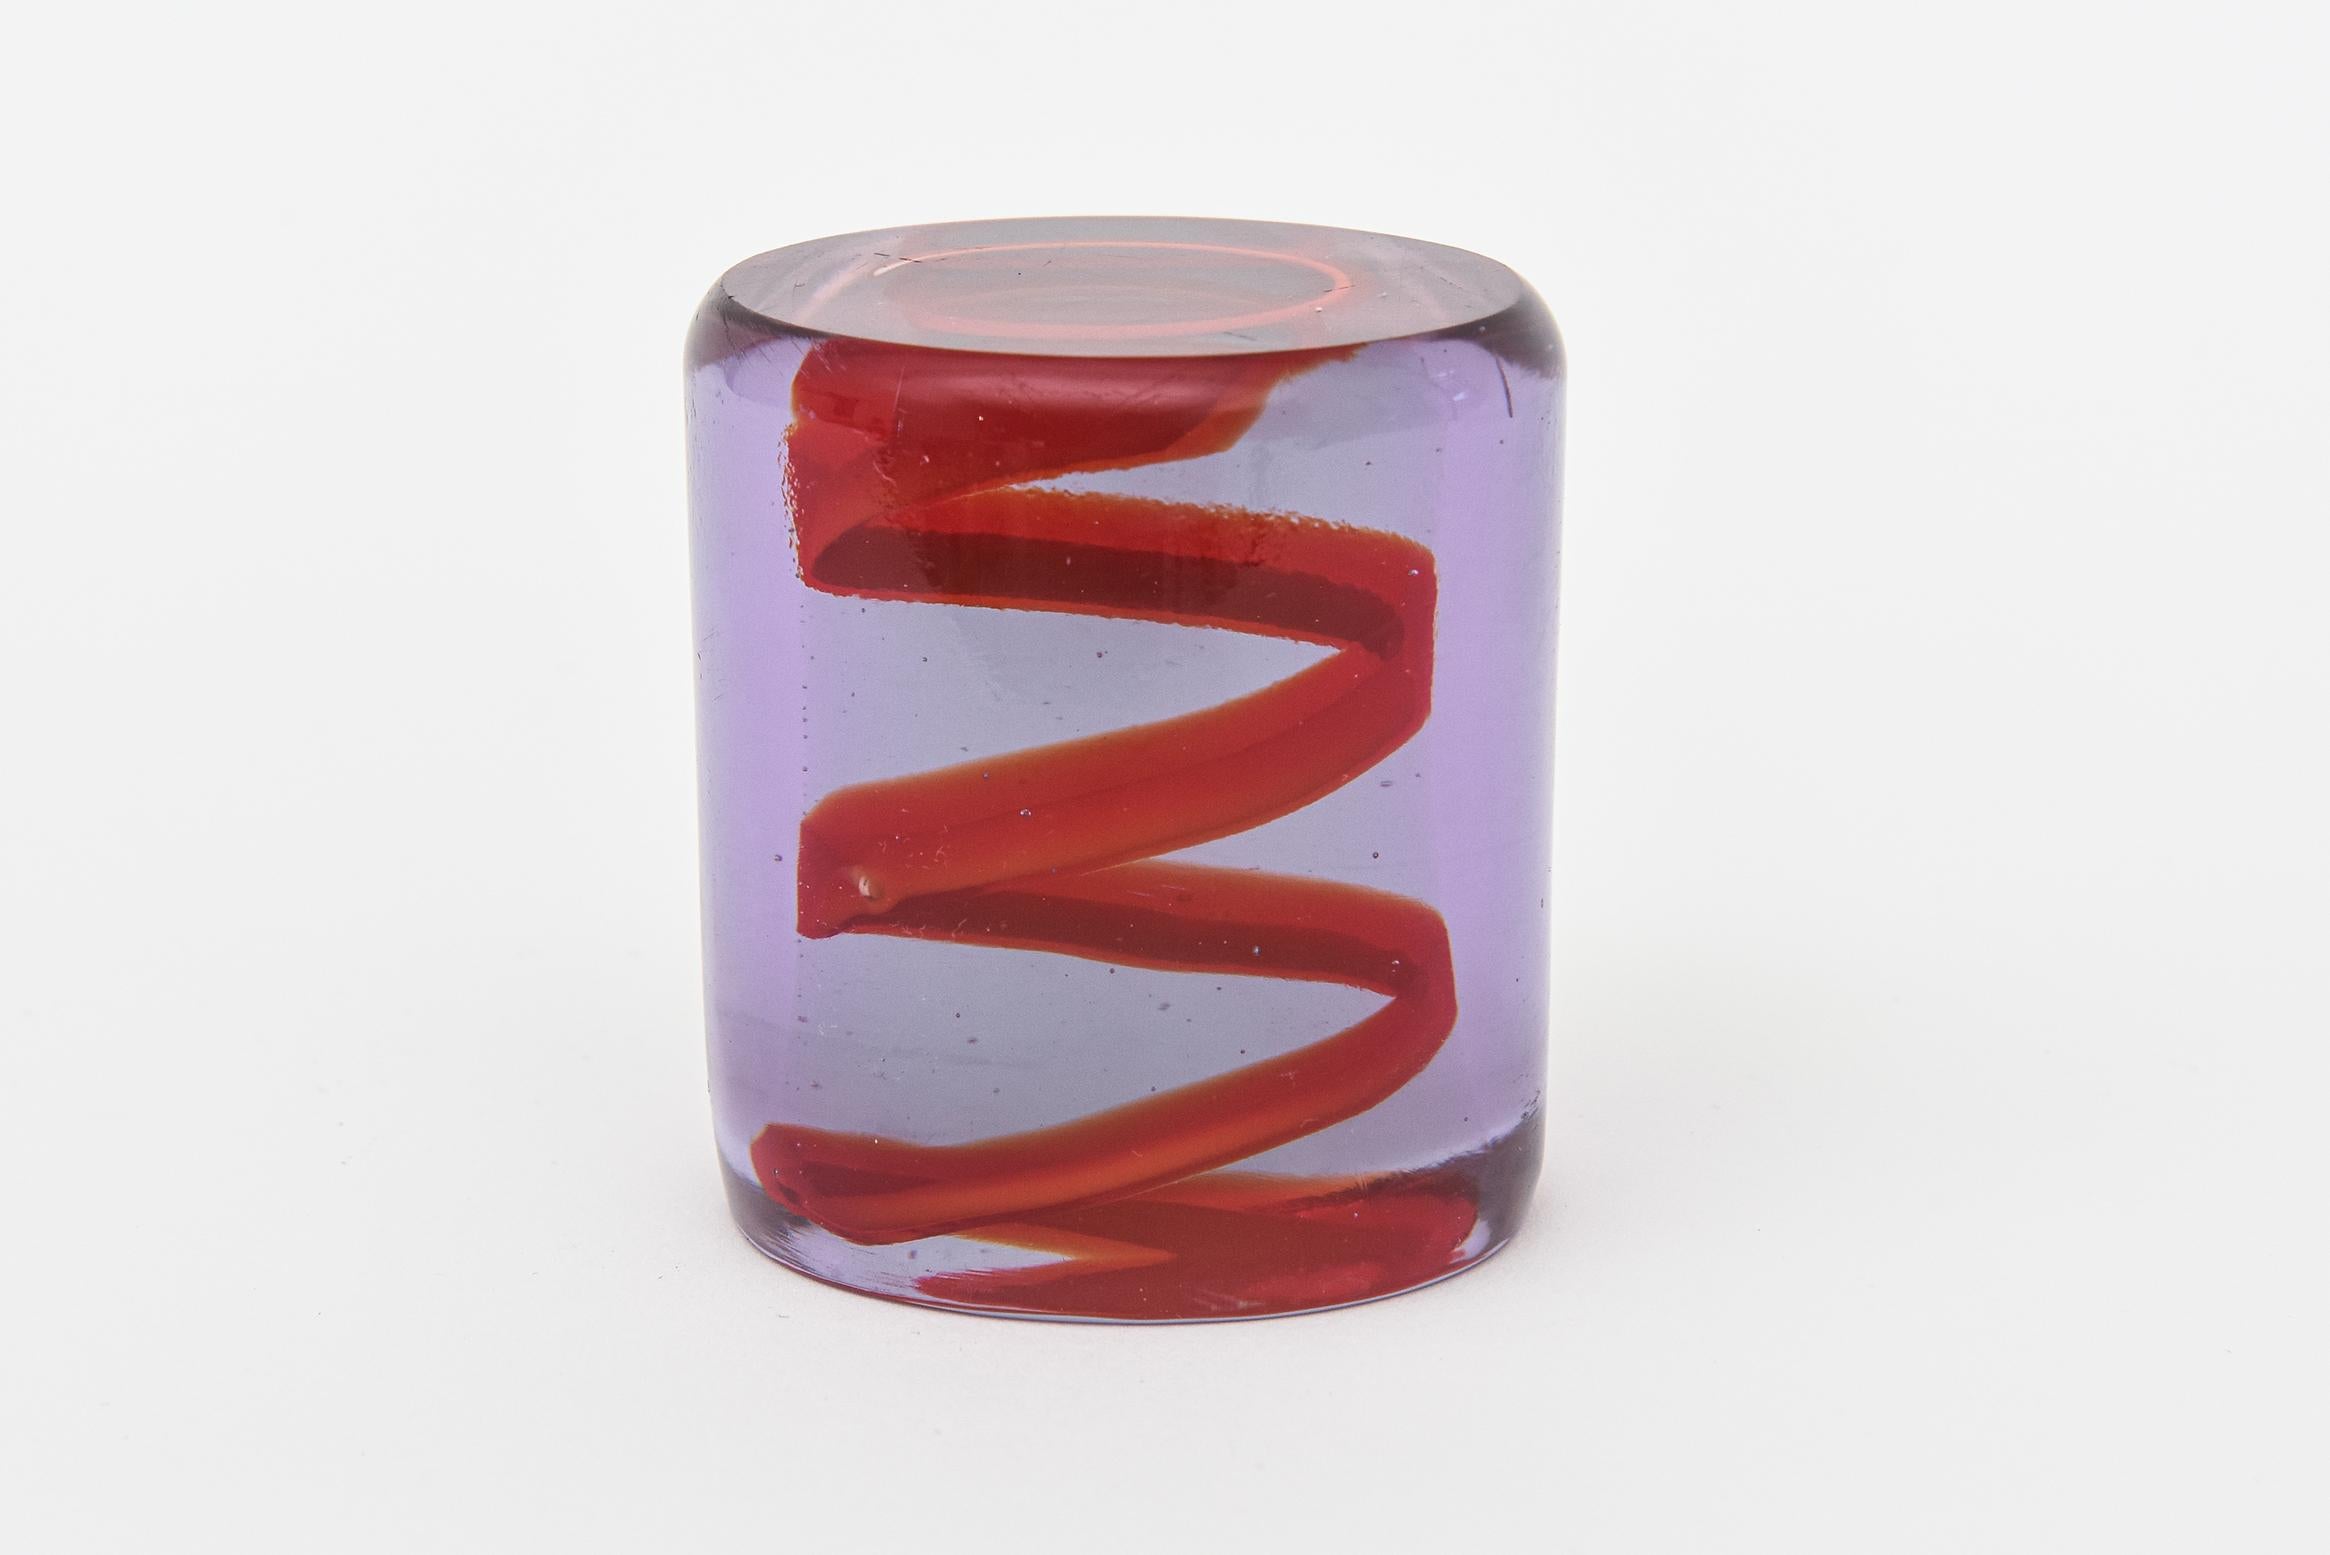 This vintage 1980's glass spiral zig zag paperweight or glass object makes a great desk accessory. The red floating glass zig zag is set of against the purple. Great color combo. It may well be Italian. It is not signed but fabulous.